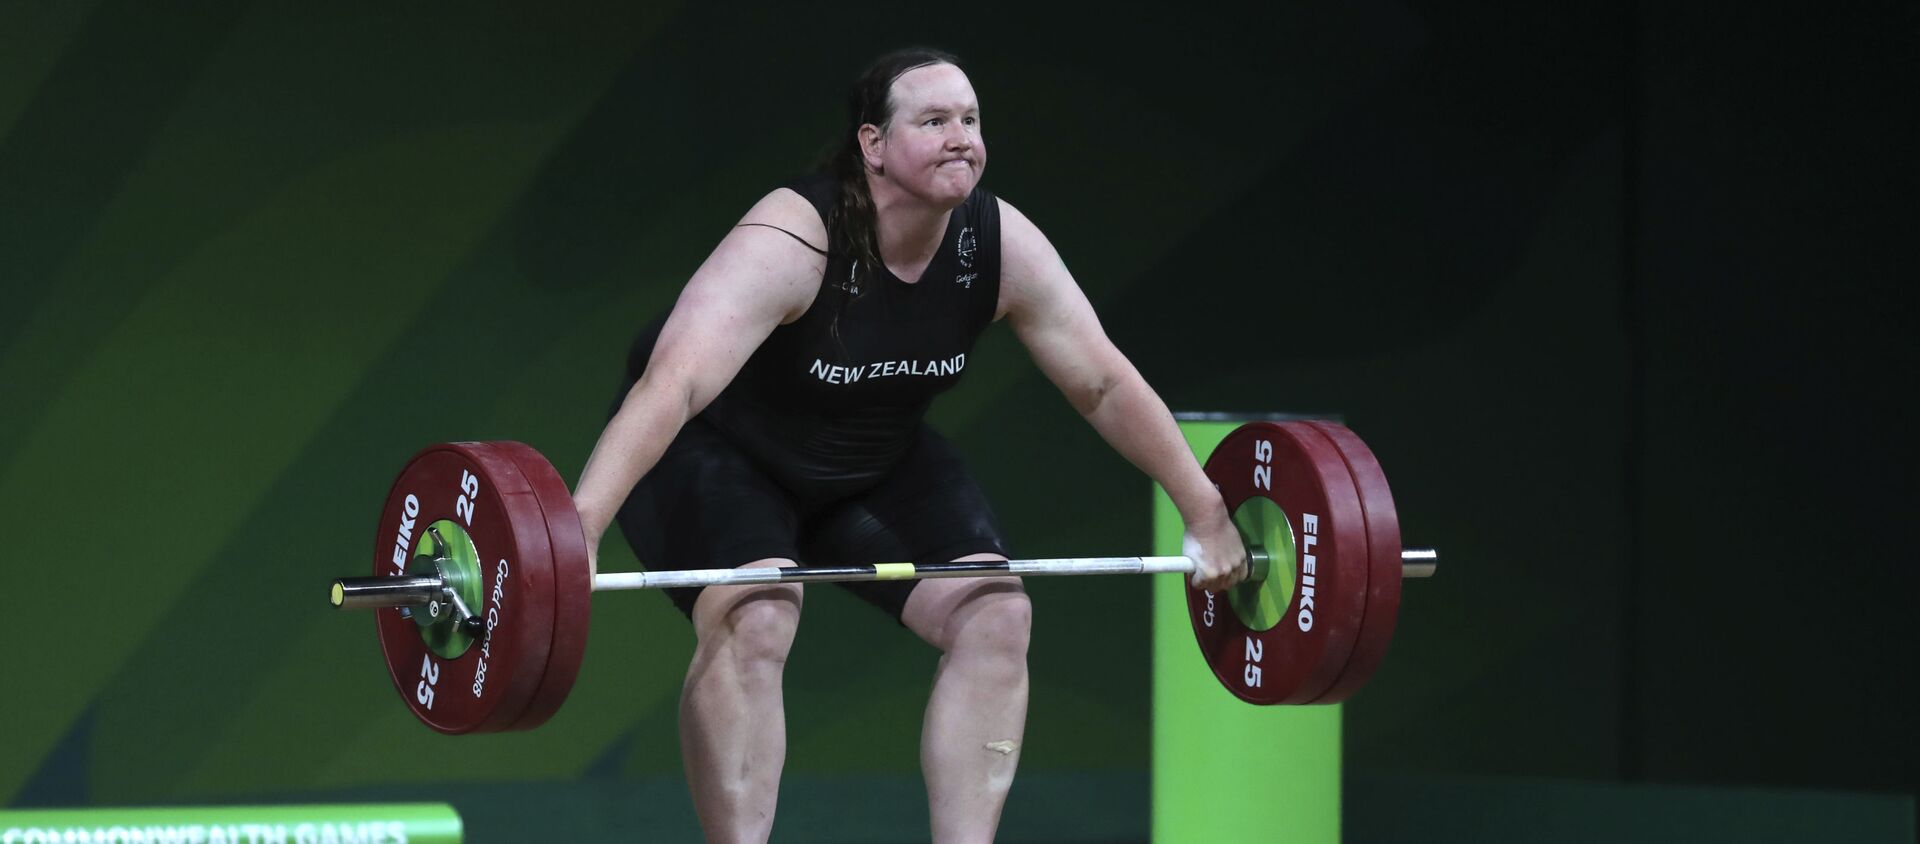 New Zealand's Laurel Hubbard lifts in the snatch of the women's +90kg weightlifting final at the 2018 Commonwealth Games on the Gold Coast, Australia, Monday, April 9, 2018 - Sputnik International, 1920, 21.06.2021